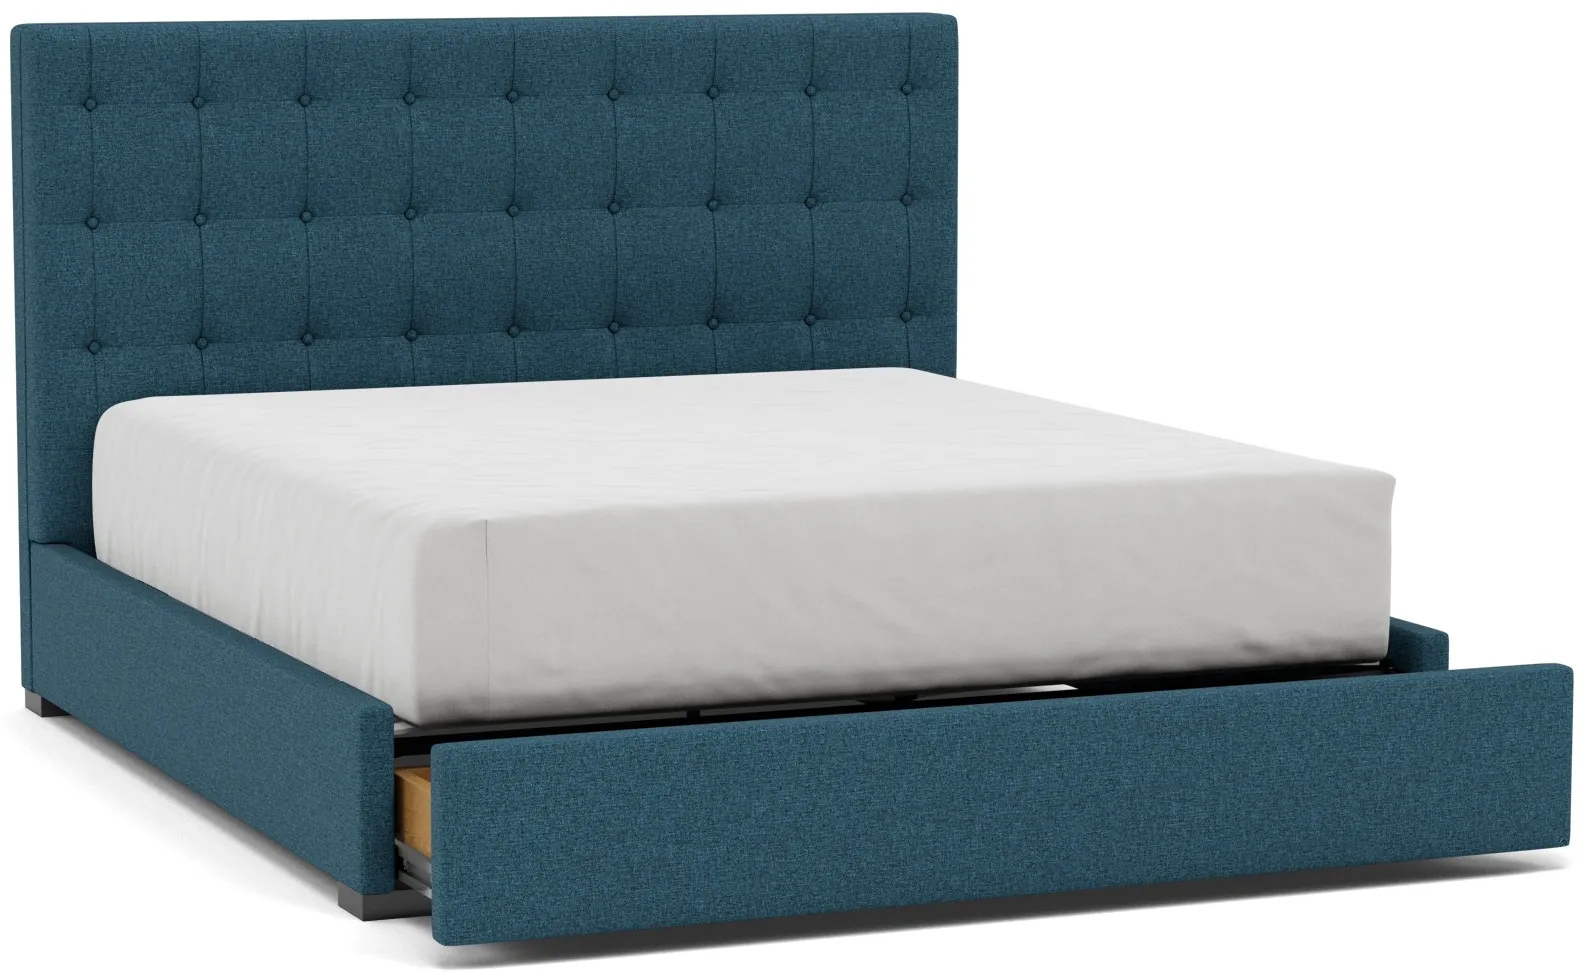 Abby King Upholstered Storage Bed in Merit Peacock